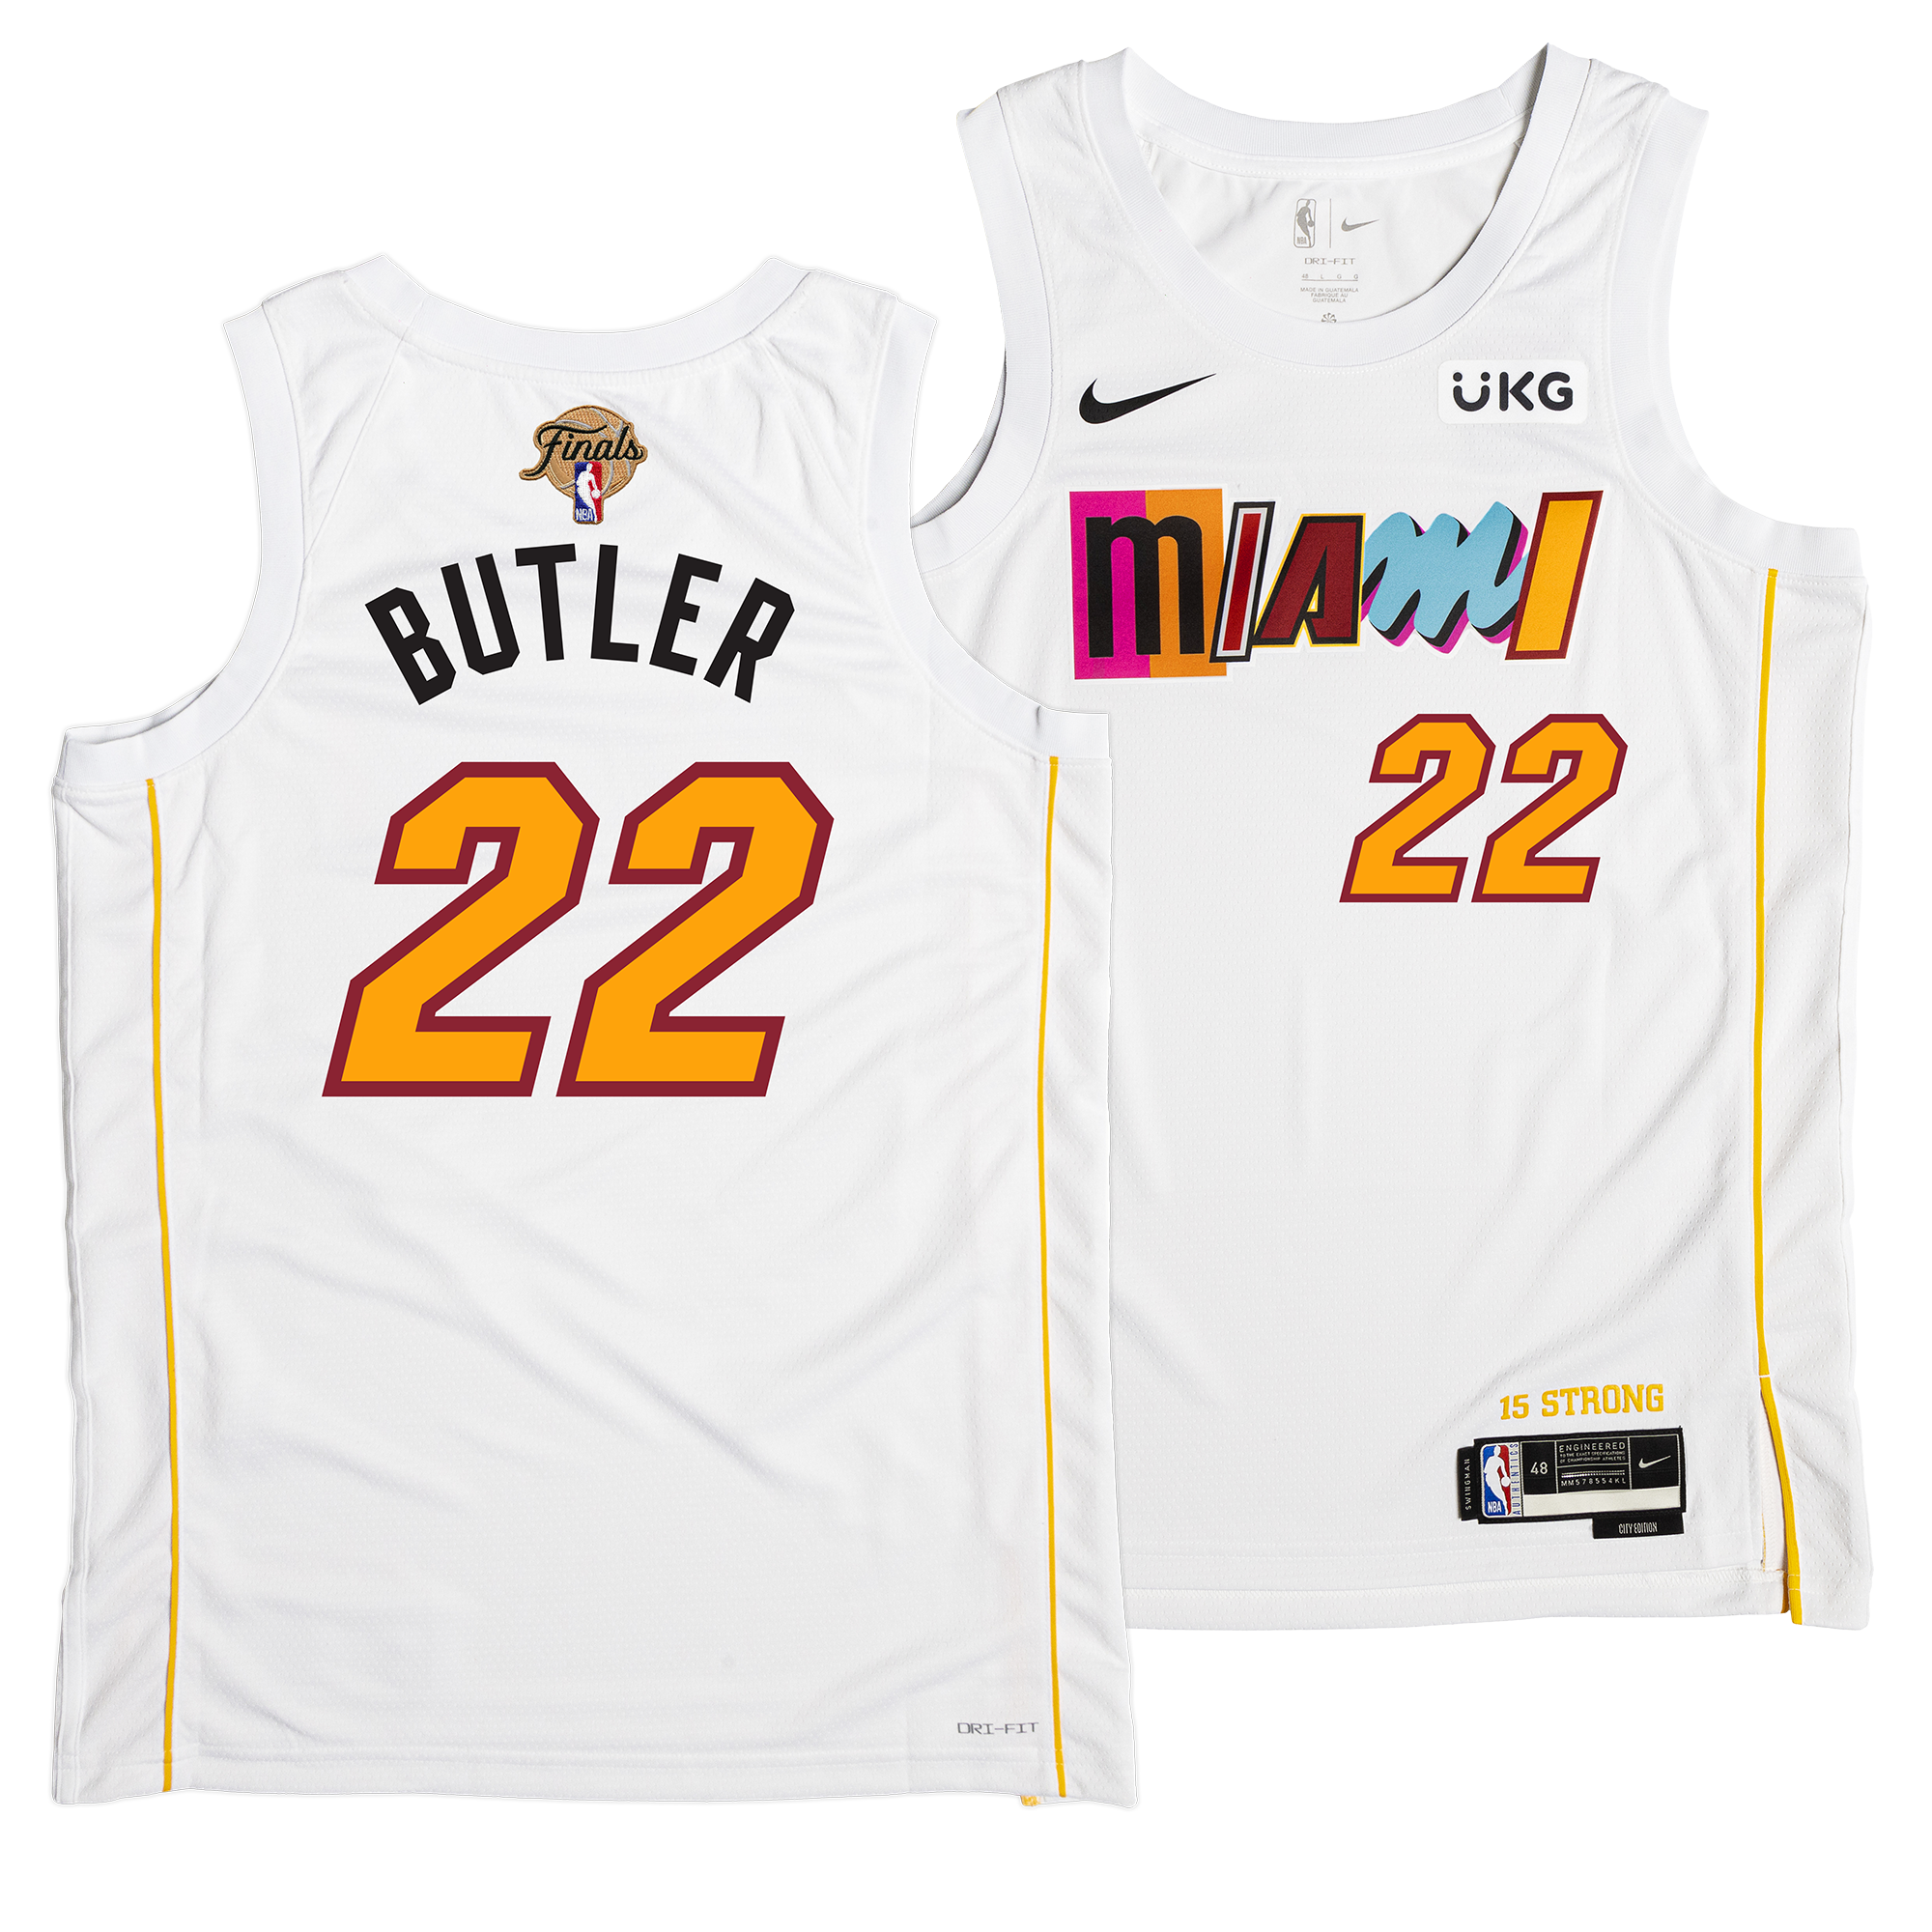  Jimmy Butler Basketball Jersey, Number 22, NBA Miami